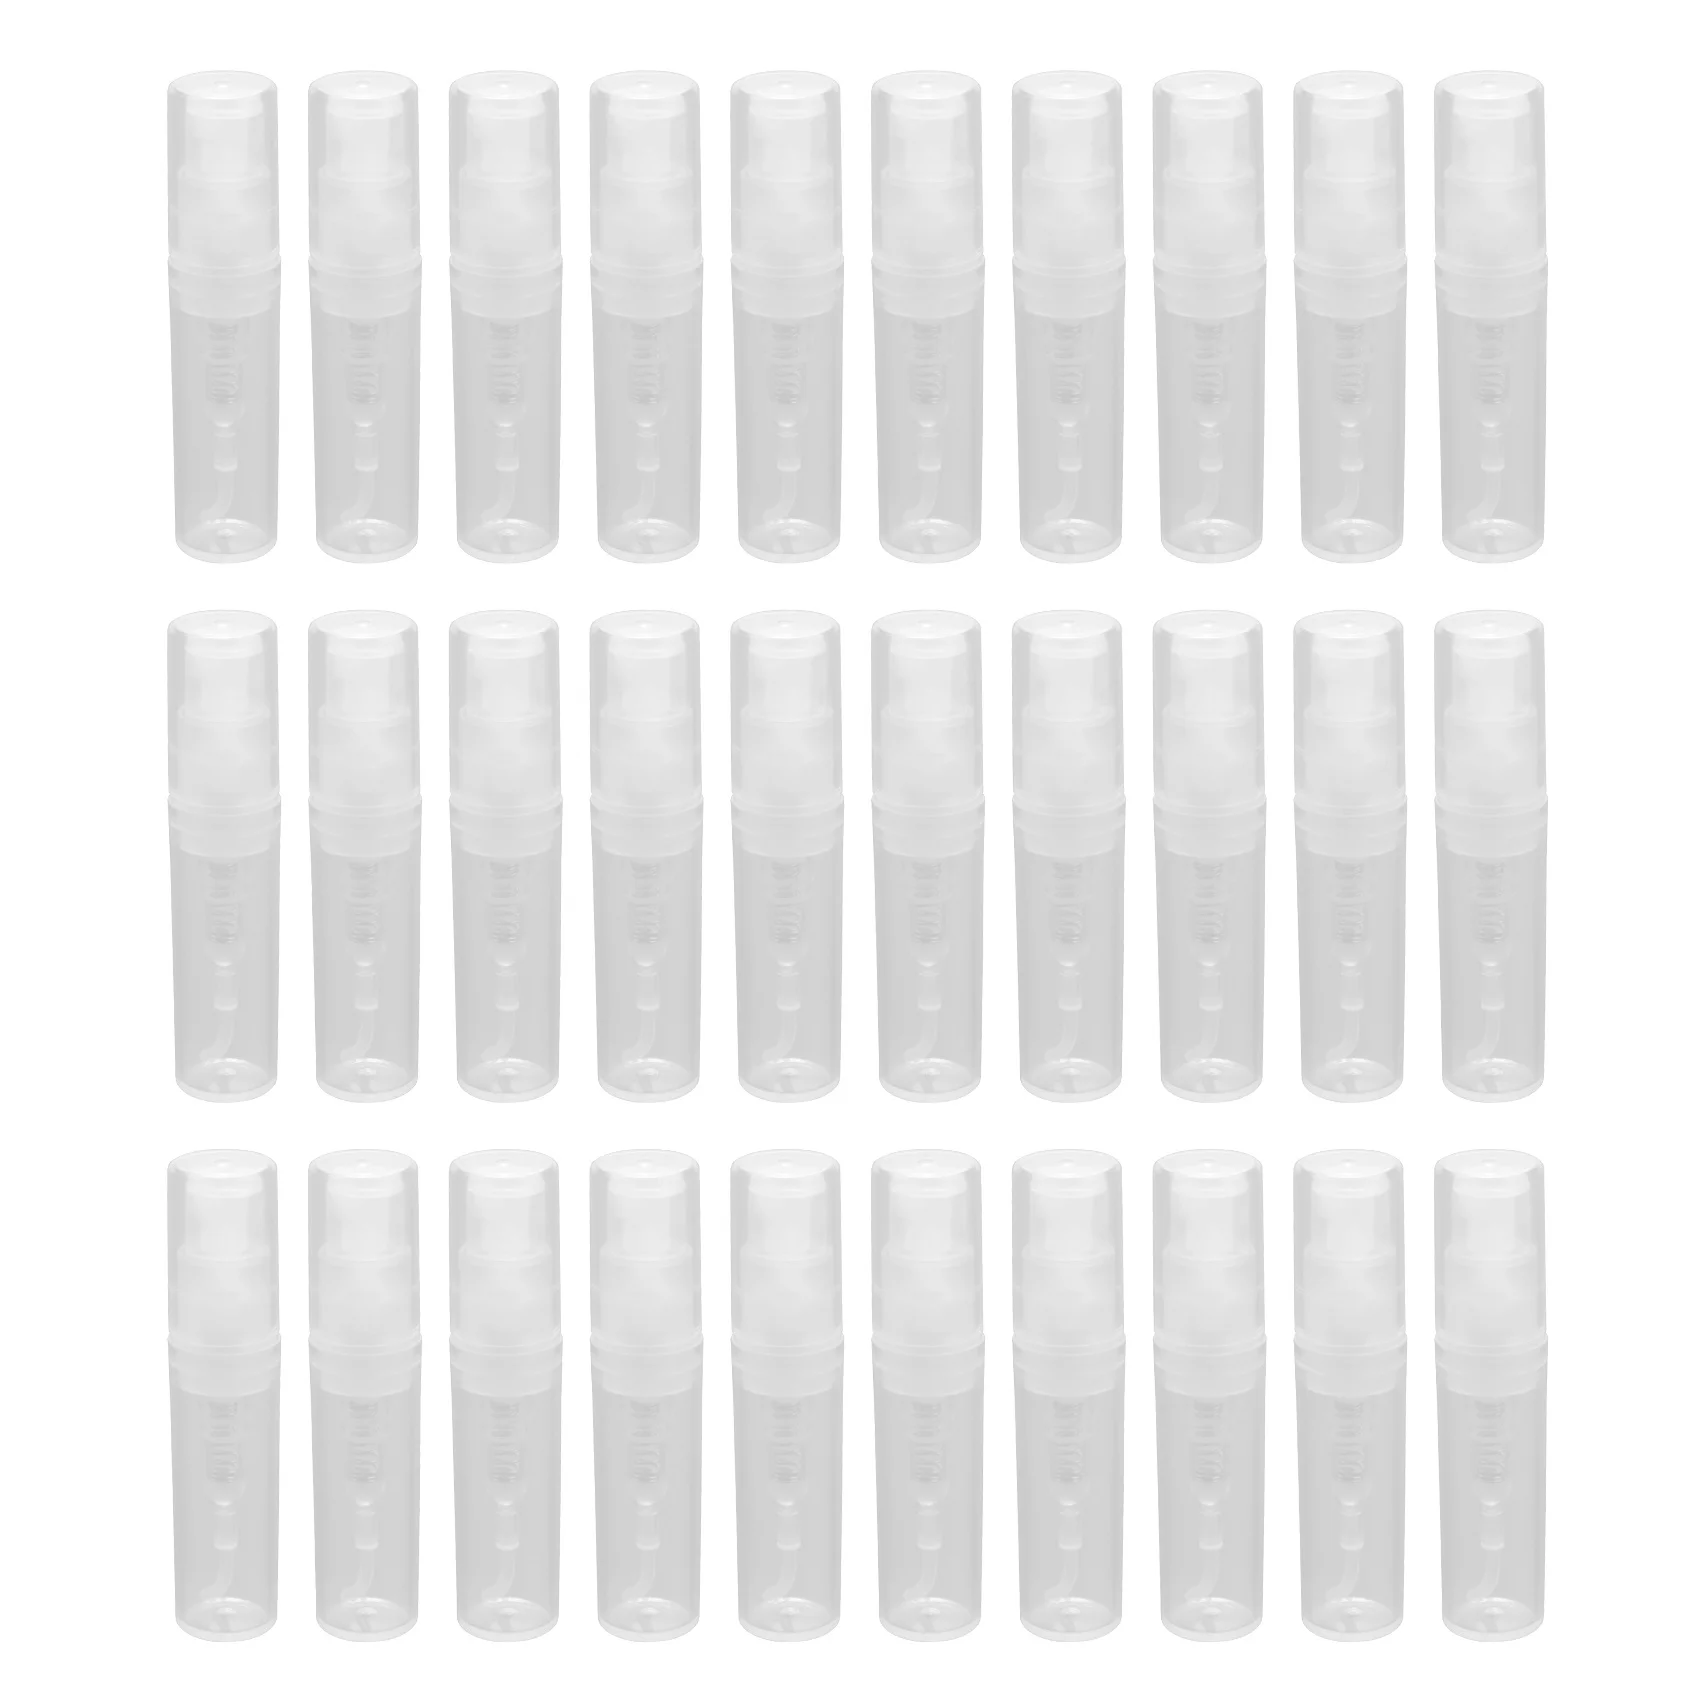 

30Pcs Clear 2Ml Atomizer Plastic Bottle Spray Disposable Perfume Empty Sample Bottle for Travel Party